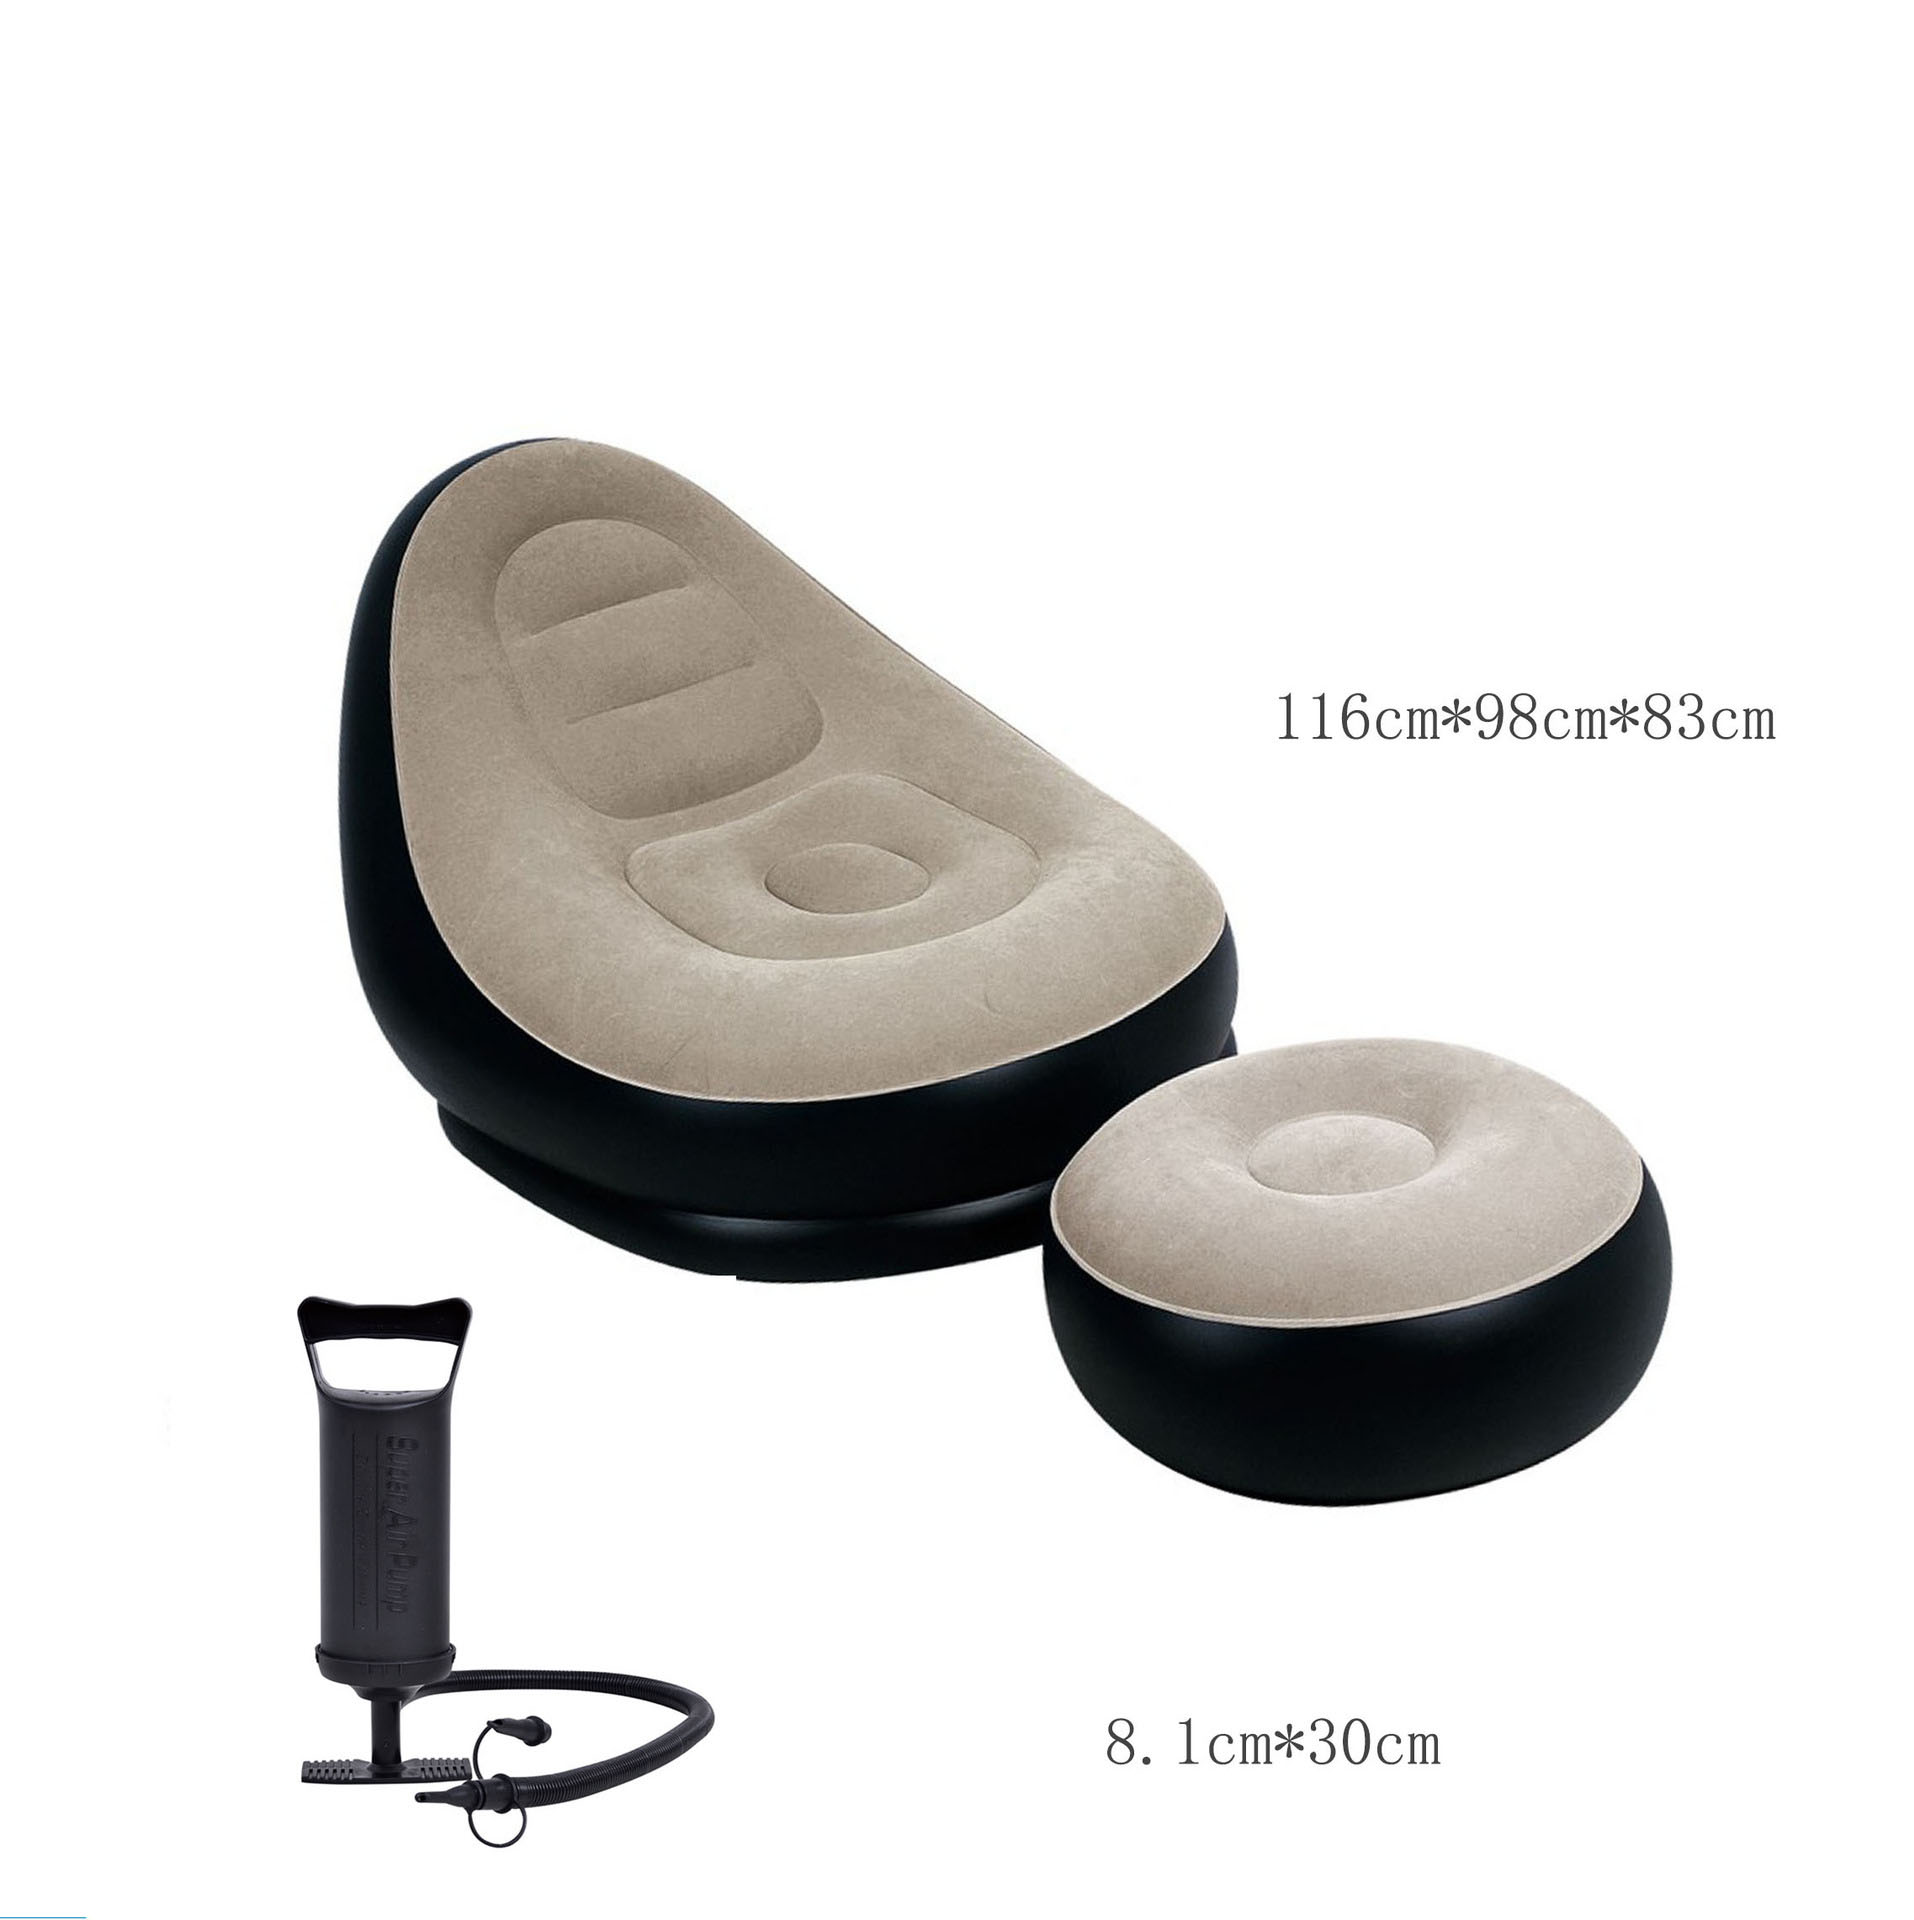 Luxury pedal sofa ( 116 * 98 * 83cm ) 27449 ( including hand-drawn inflatable pump )